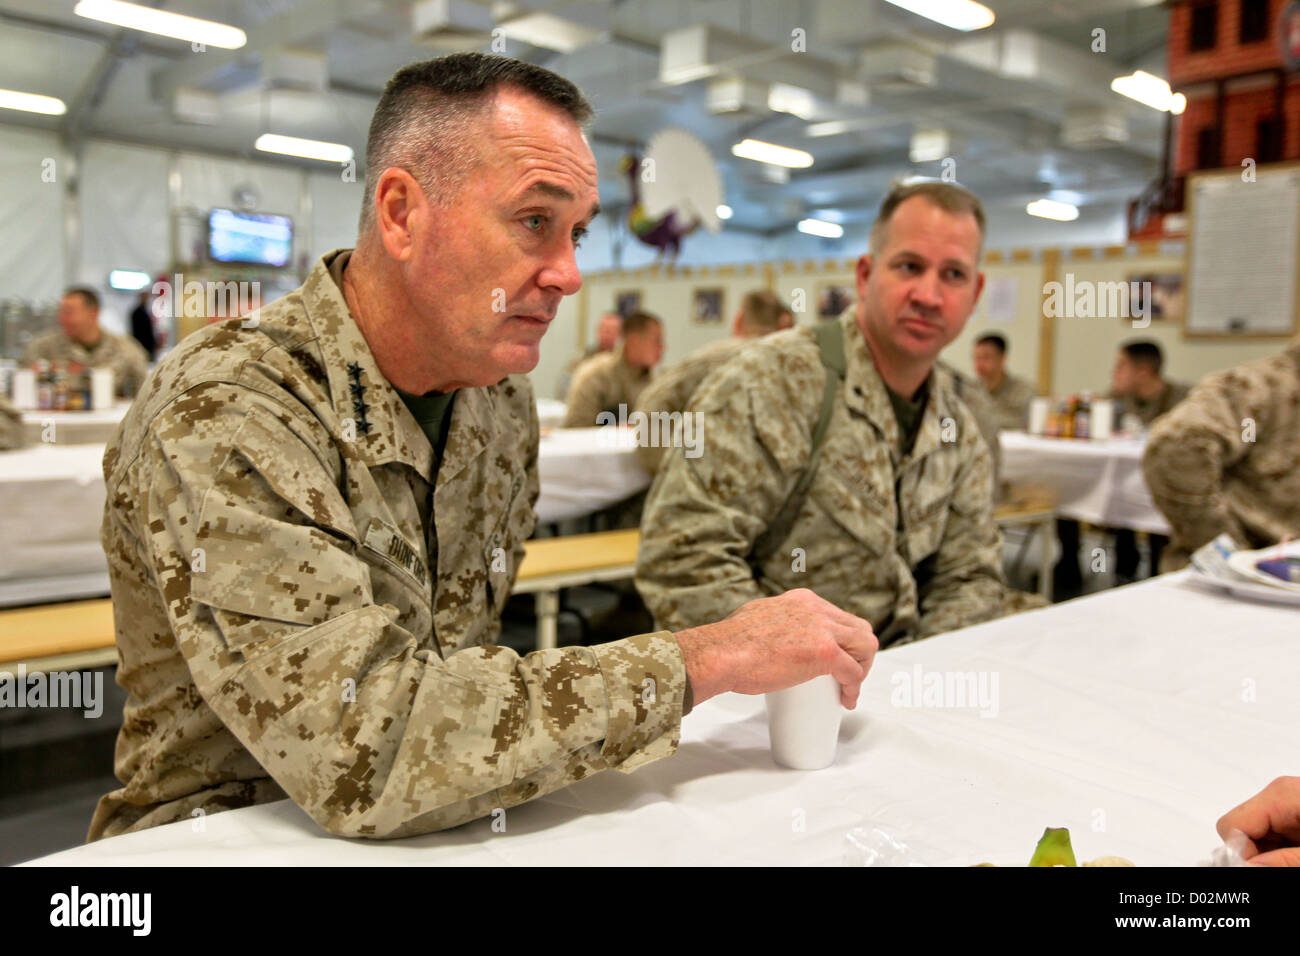 US Marine General Joseph Dunford, assistant commandant of the Marine Corps, has breakfast with Marines during a Christmas Day visit December 25, 2011 in Helmand, Afghanistan. Stock Photo